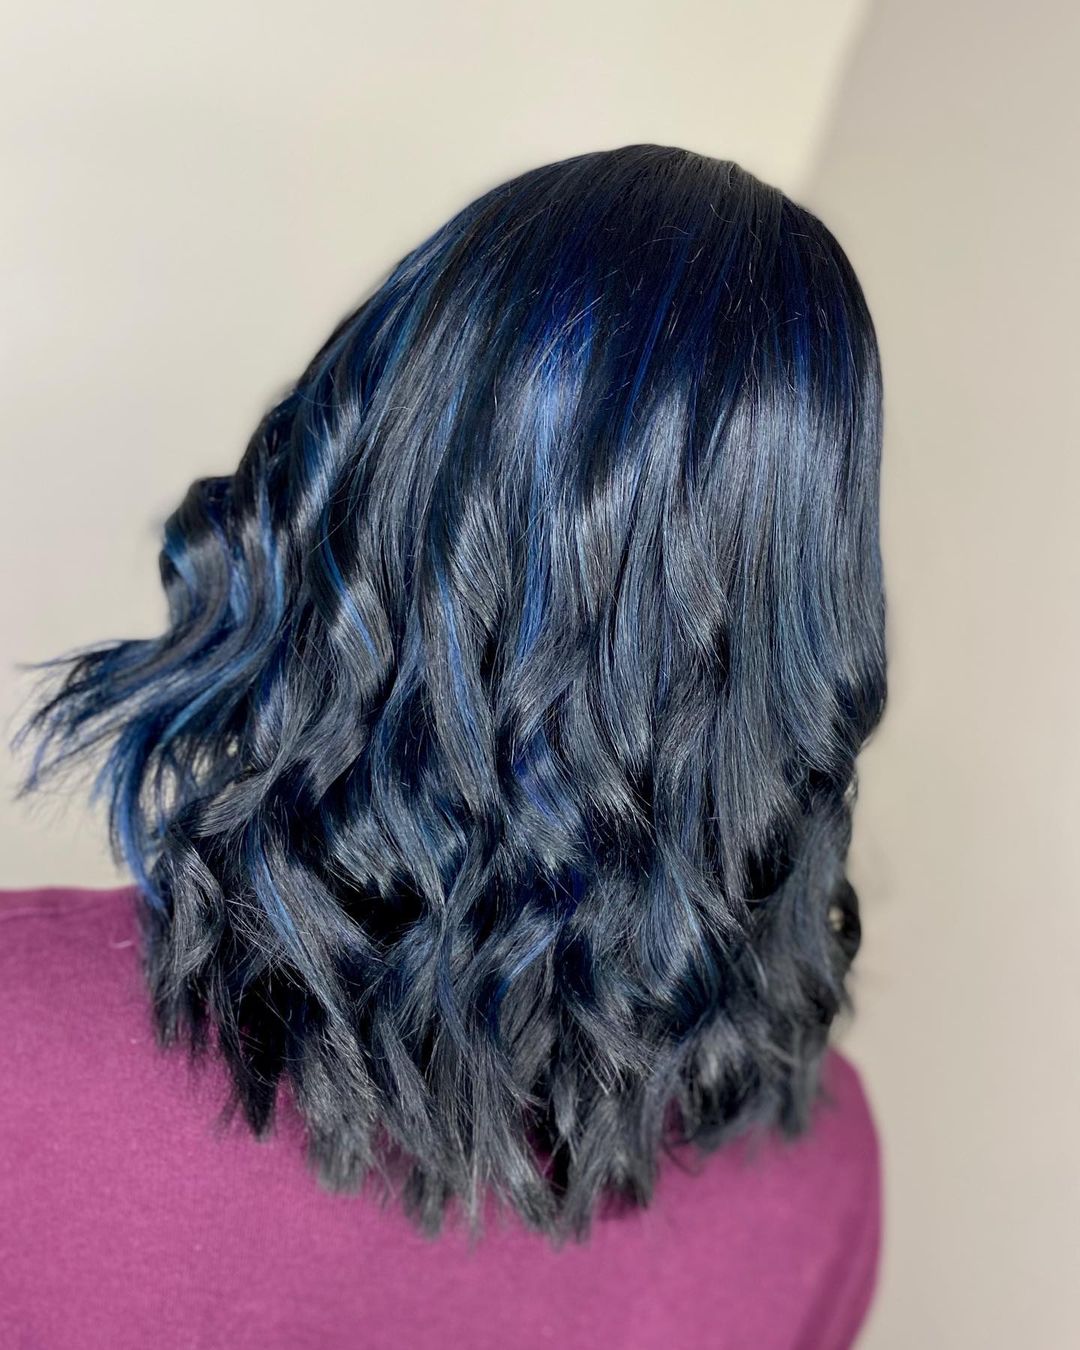 Black Hair with Unique Blue Highlights